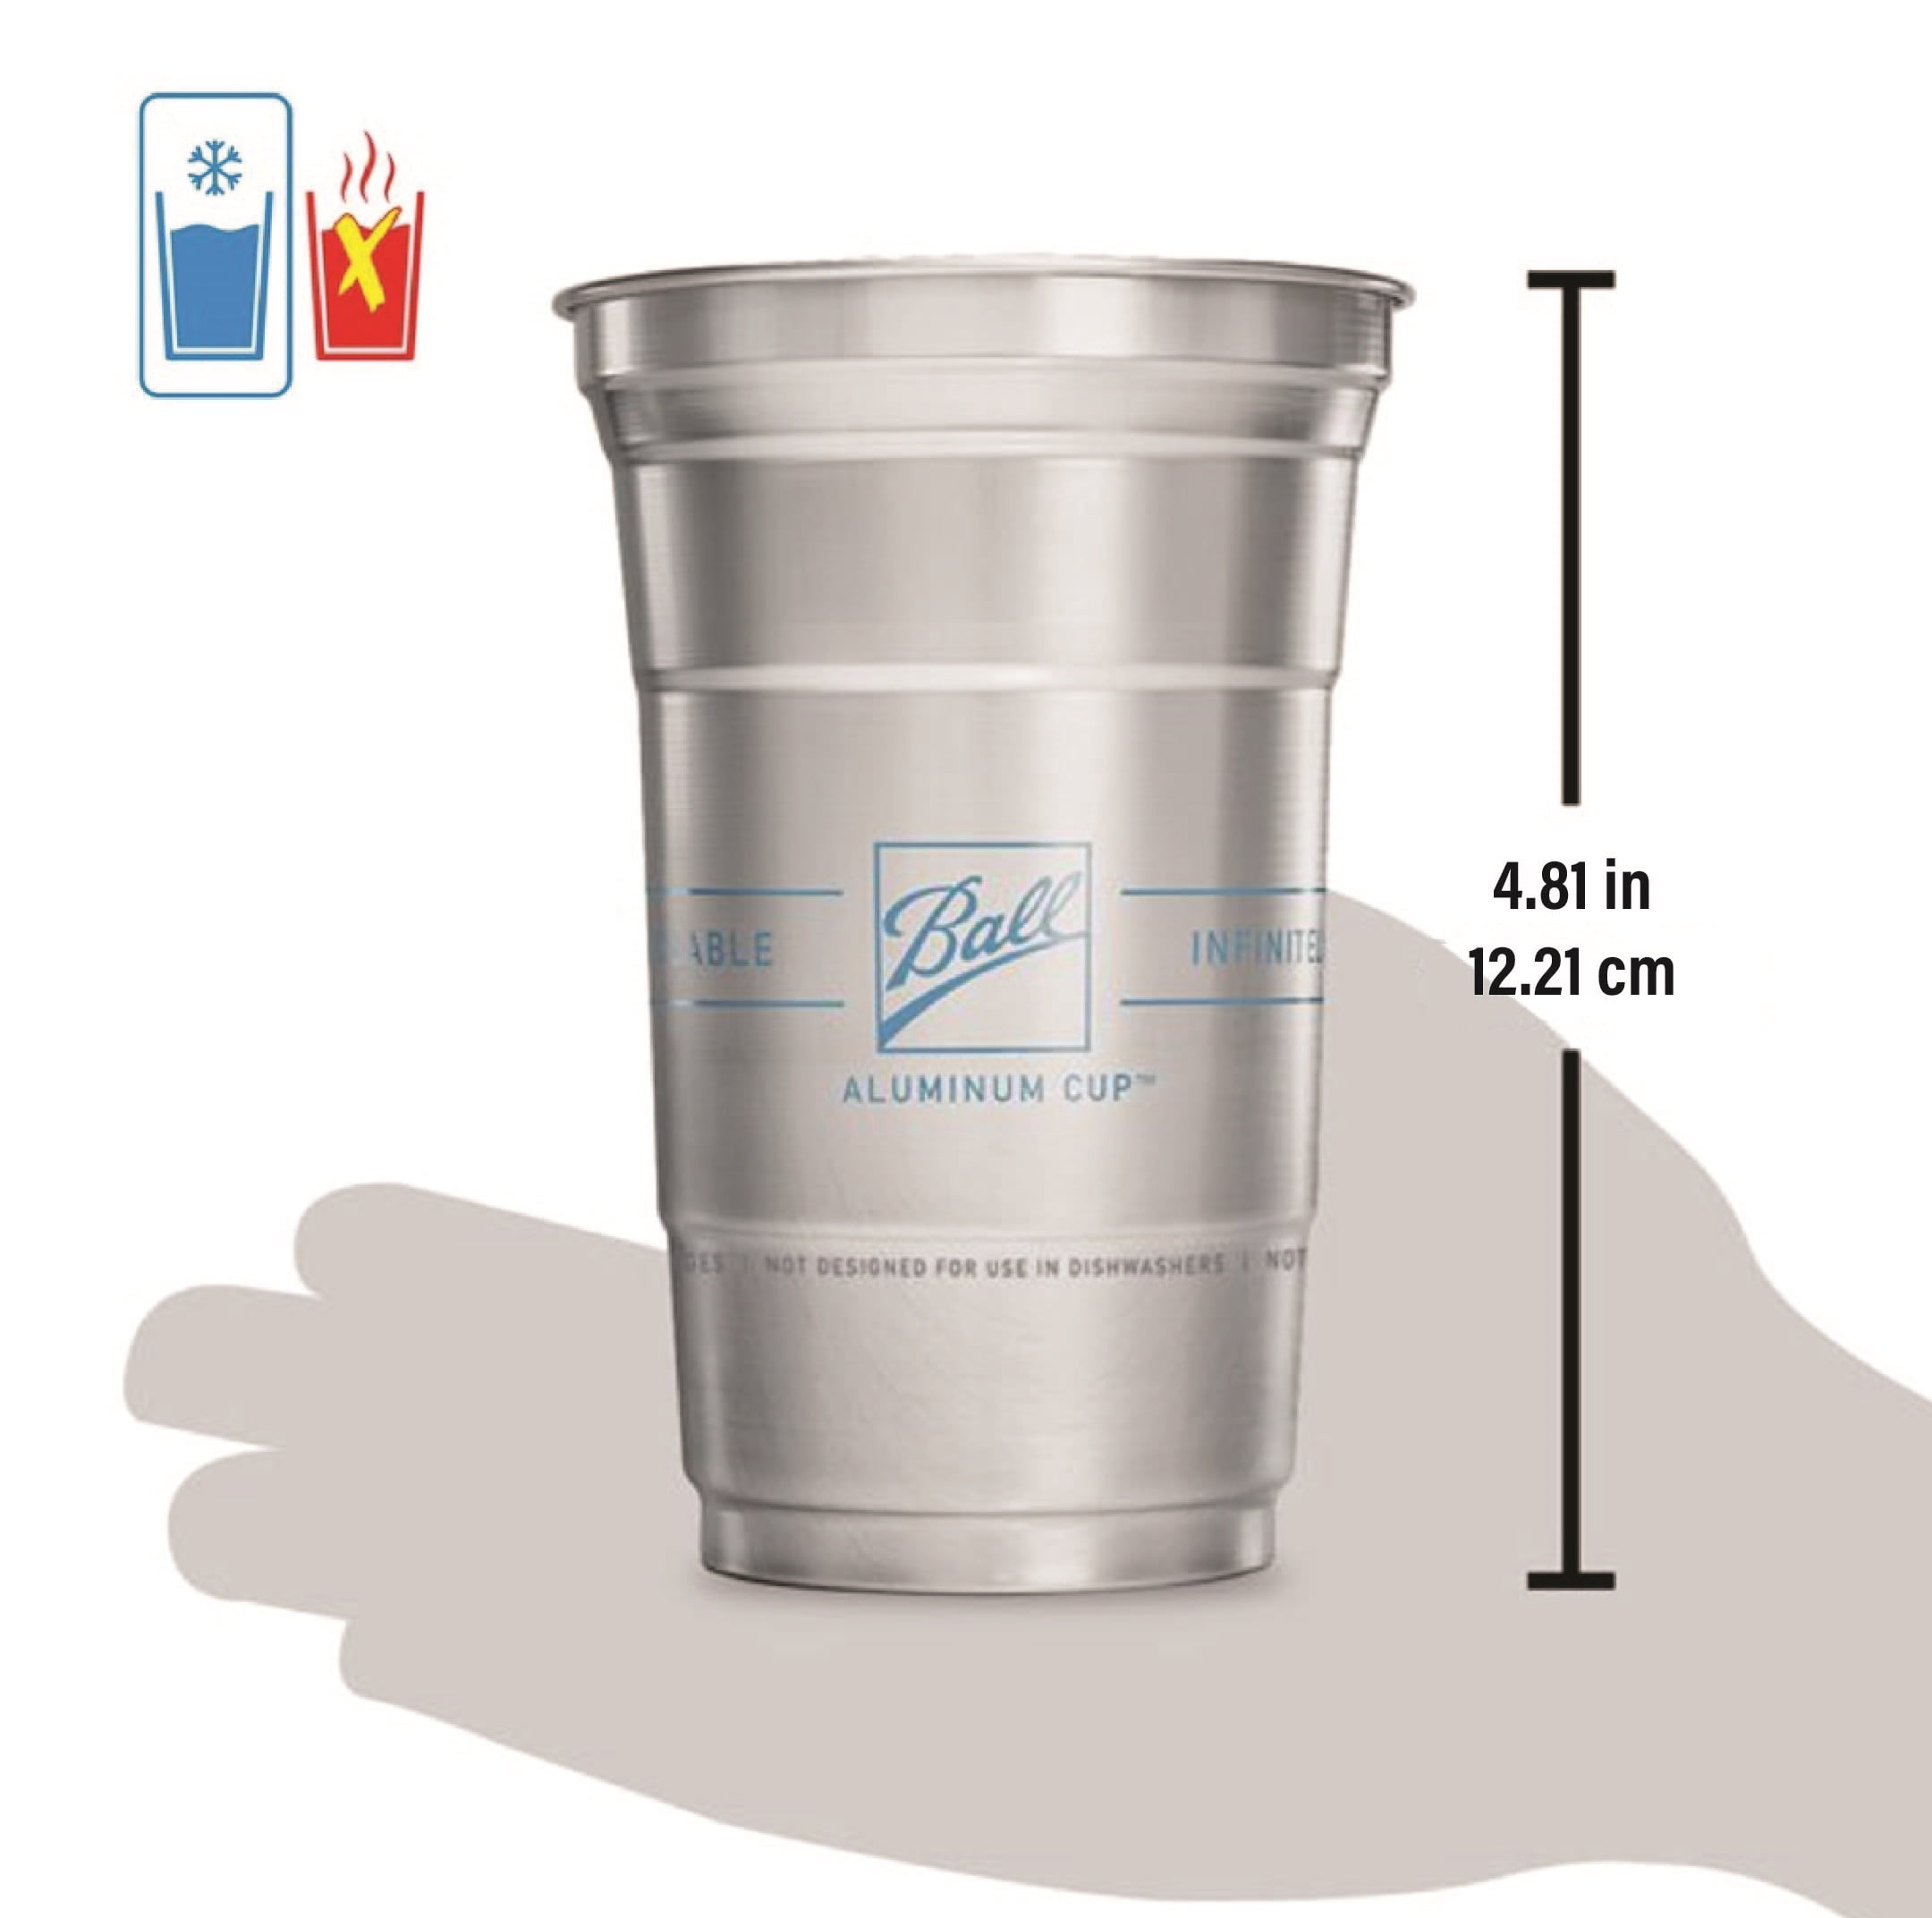 Ball's Infinitely Disposable Aluminum Cups to Replace Plastic Cups